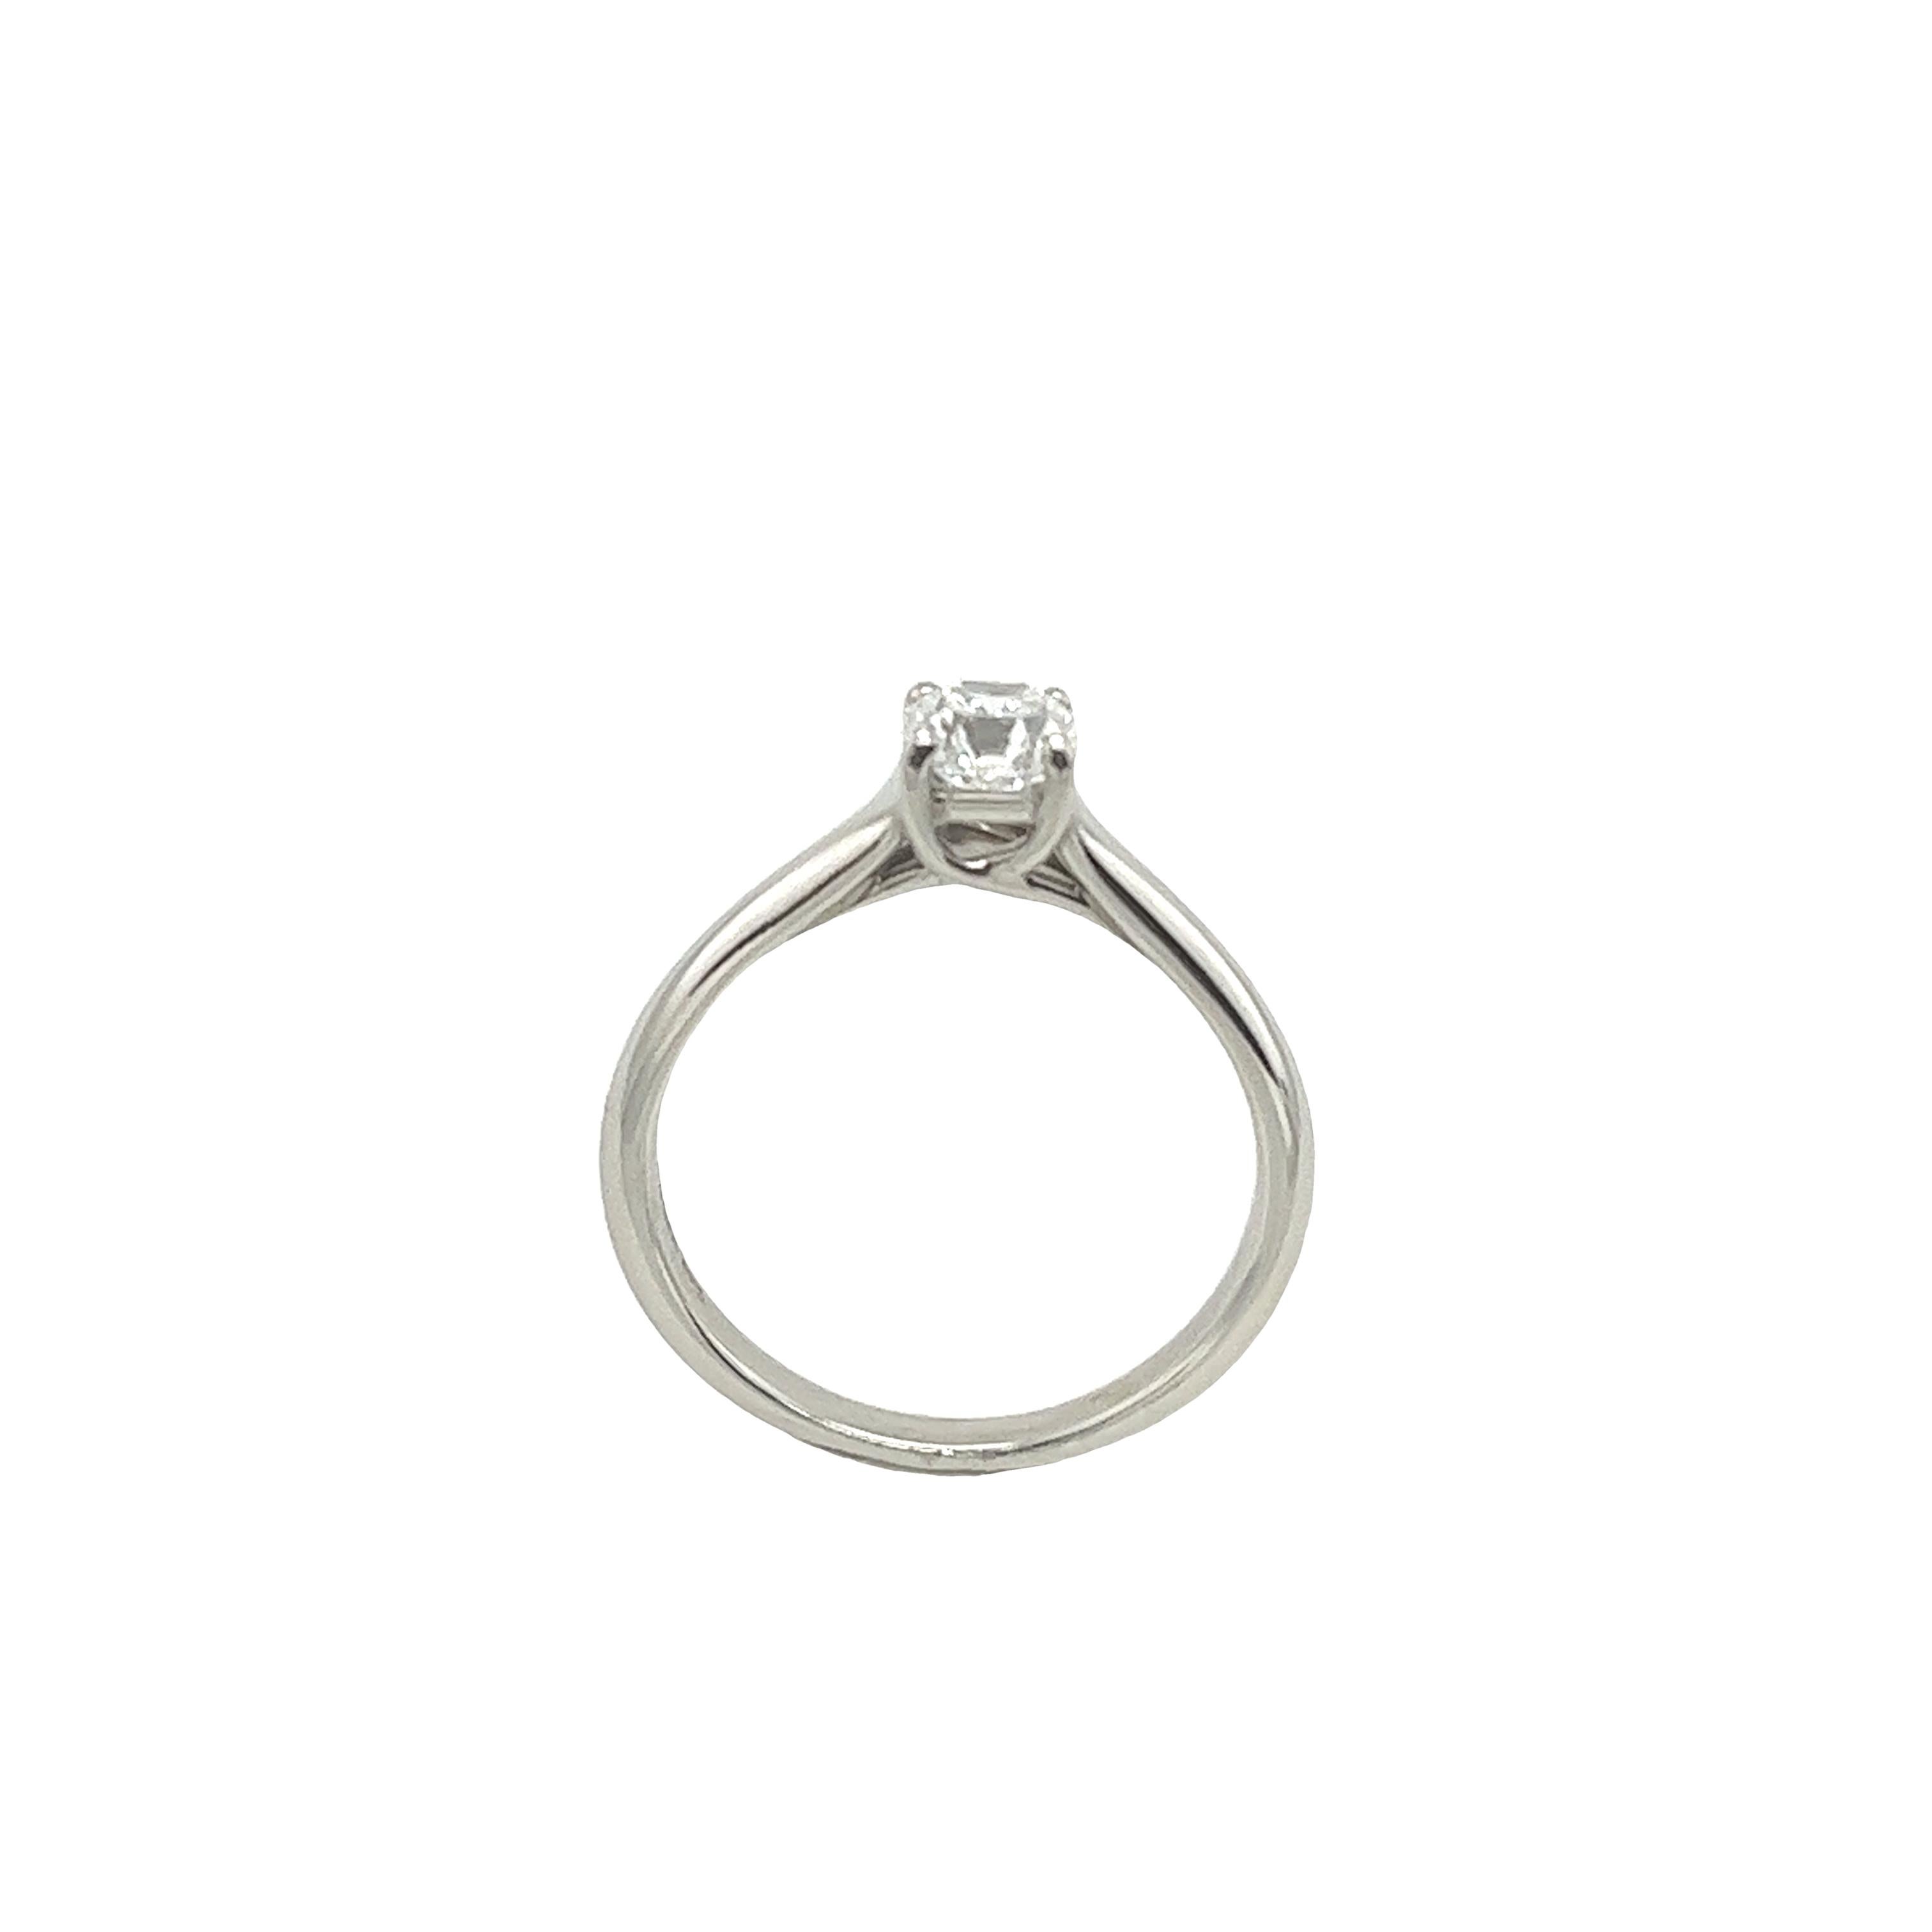 Tiffany & Co. Platinum Solitaire Engagement Ring, Set with 0.52ct E/VVS2 Diamond For Sale 2